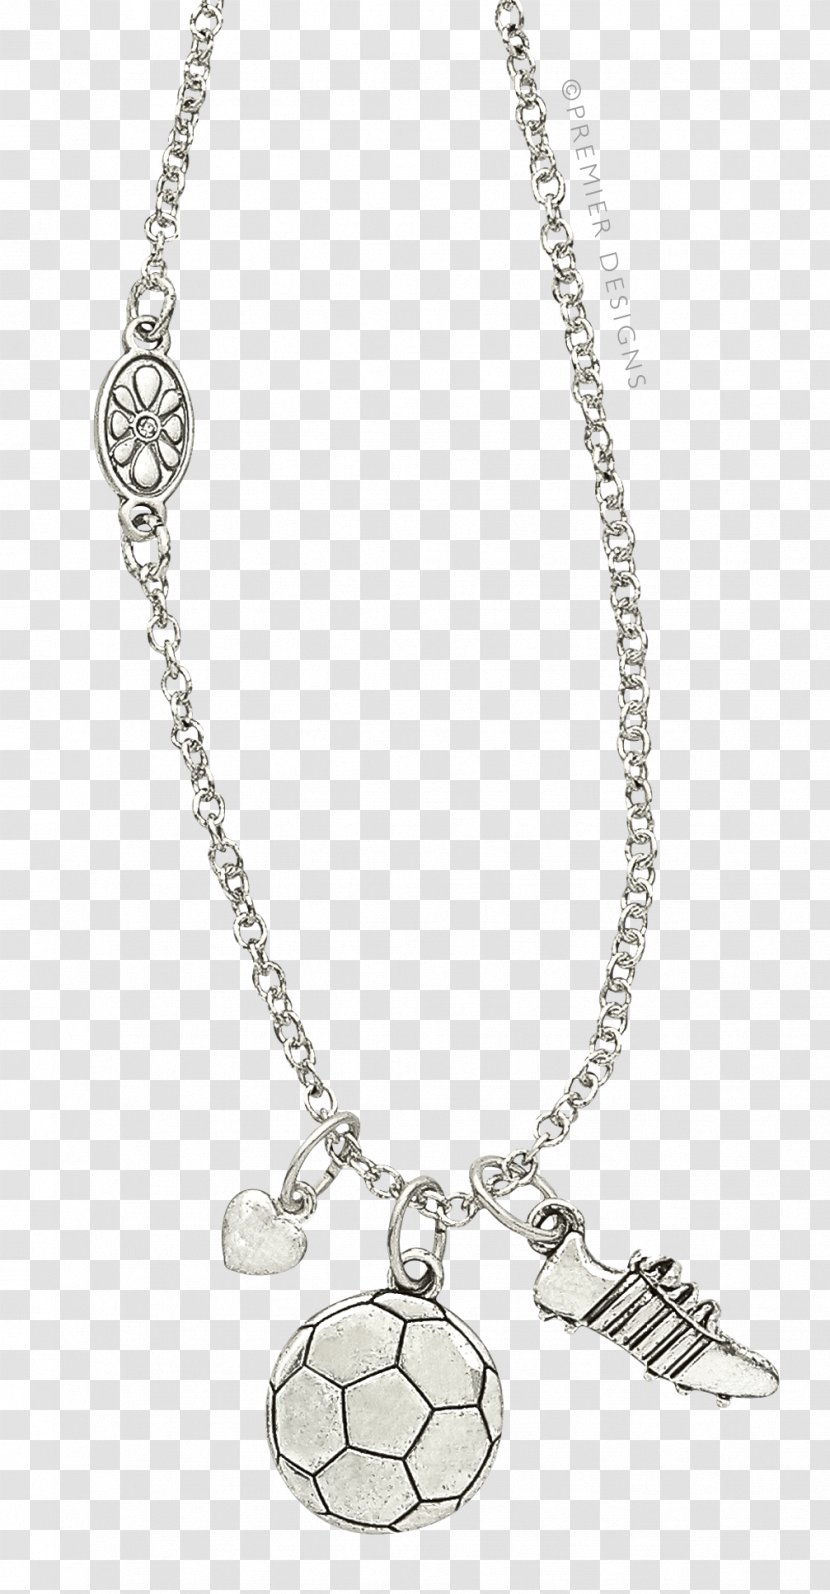 Locket Jewellery Necklace Silver Chain - Jewelry Model Transparent PNG